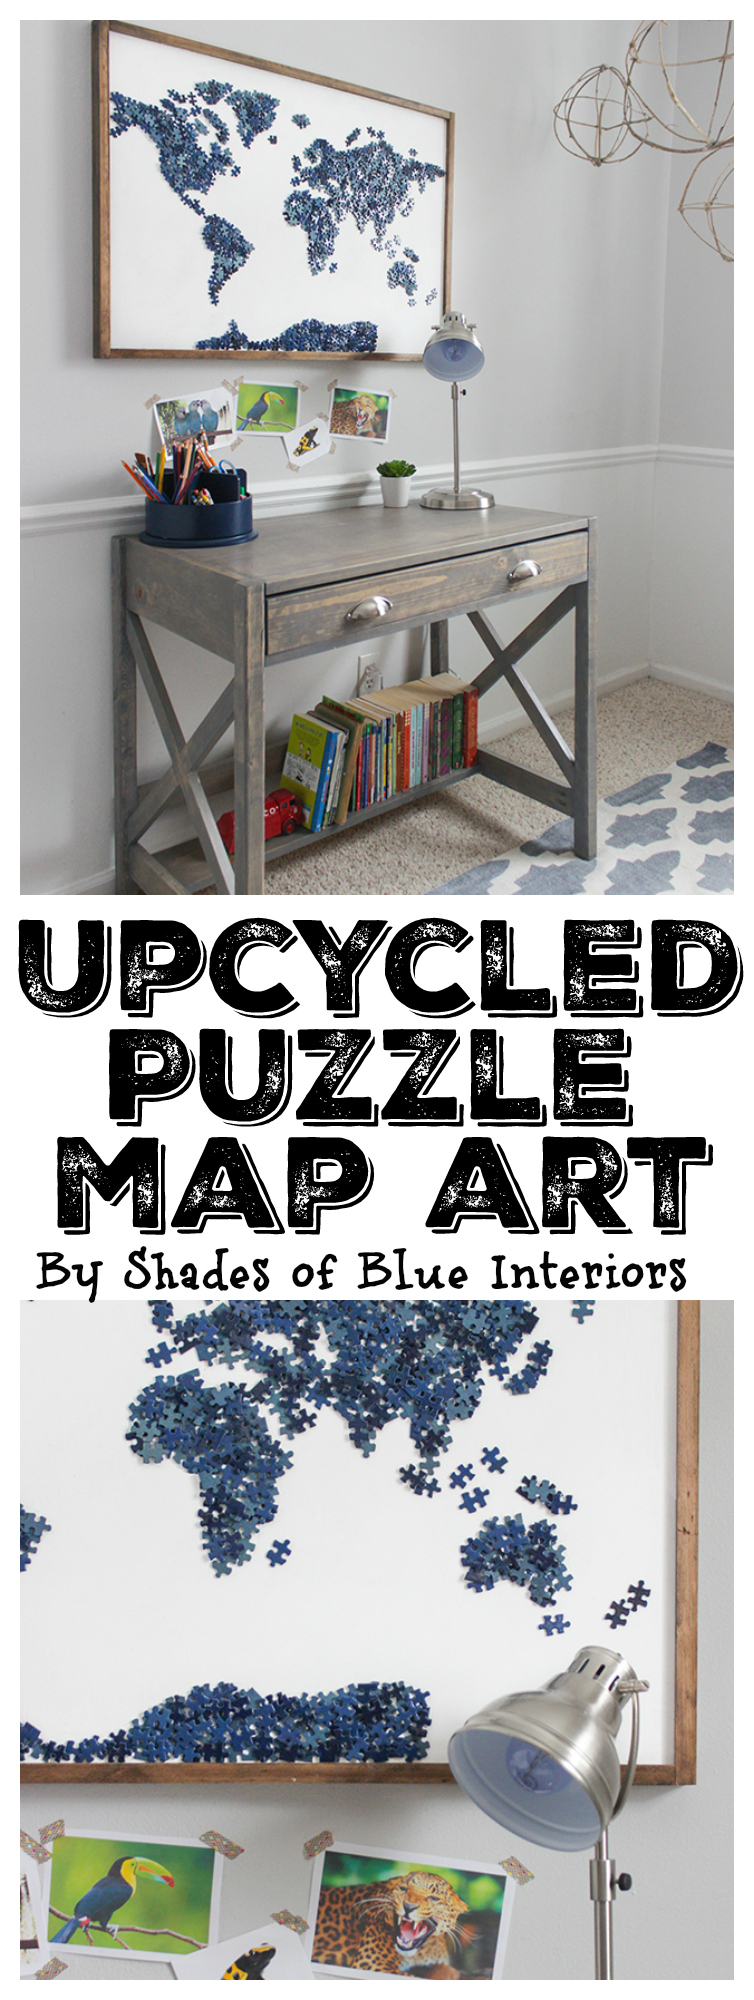 Upcycled Puzzle Map Art